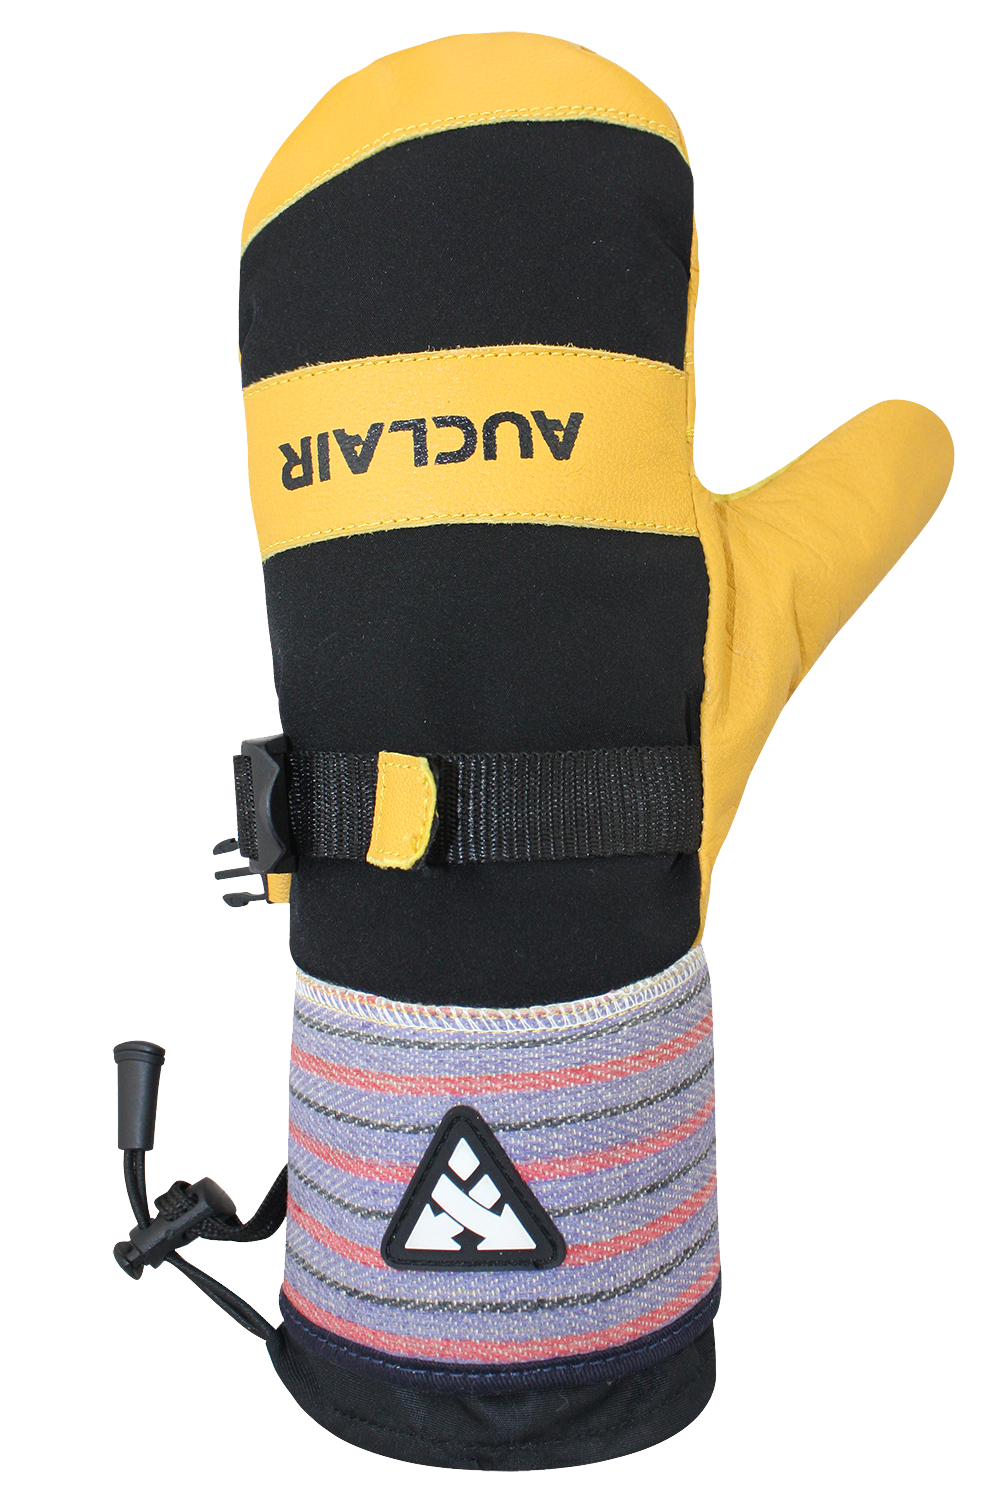 Mountain Ops 2 Mitts - Junior, Black/Gold